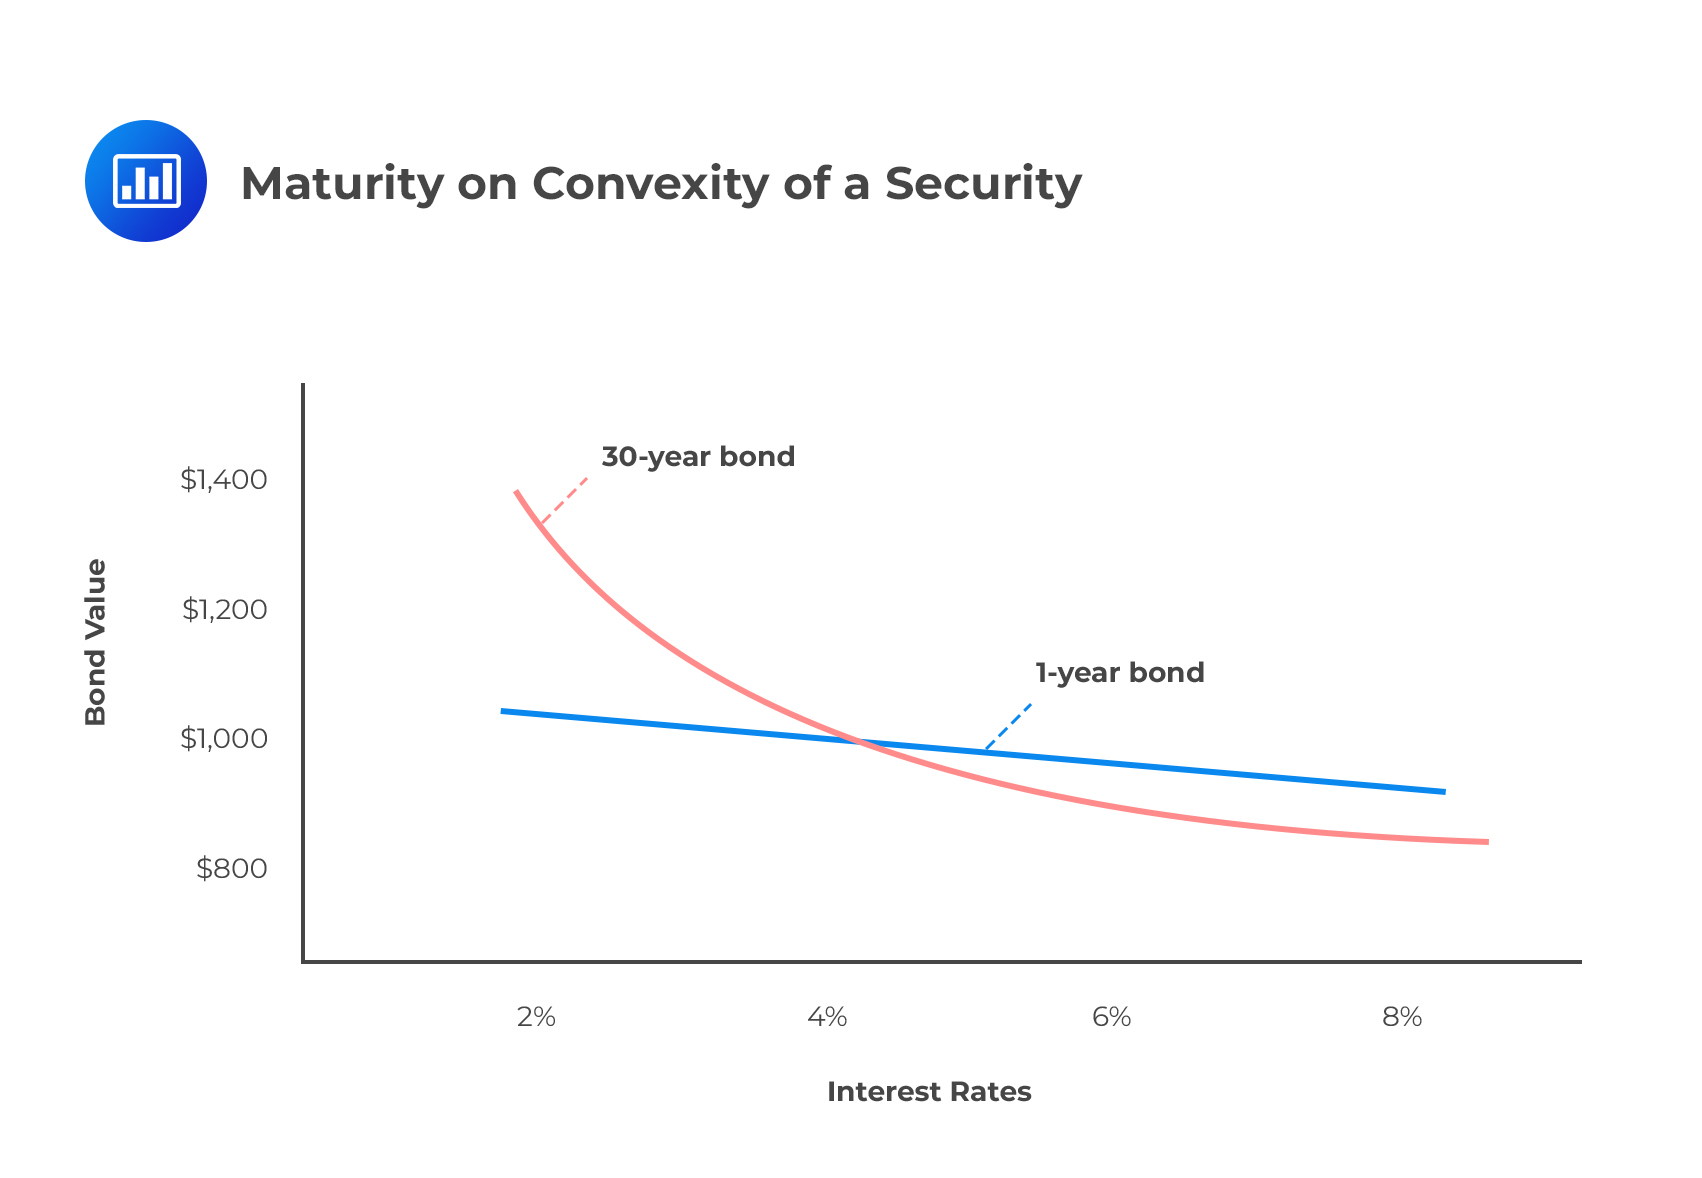 Maturity on Convexity of a Security